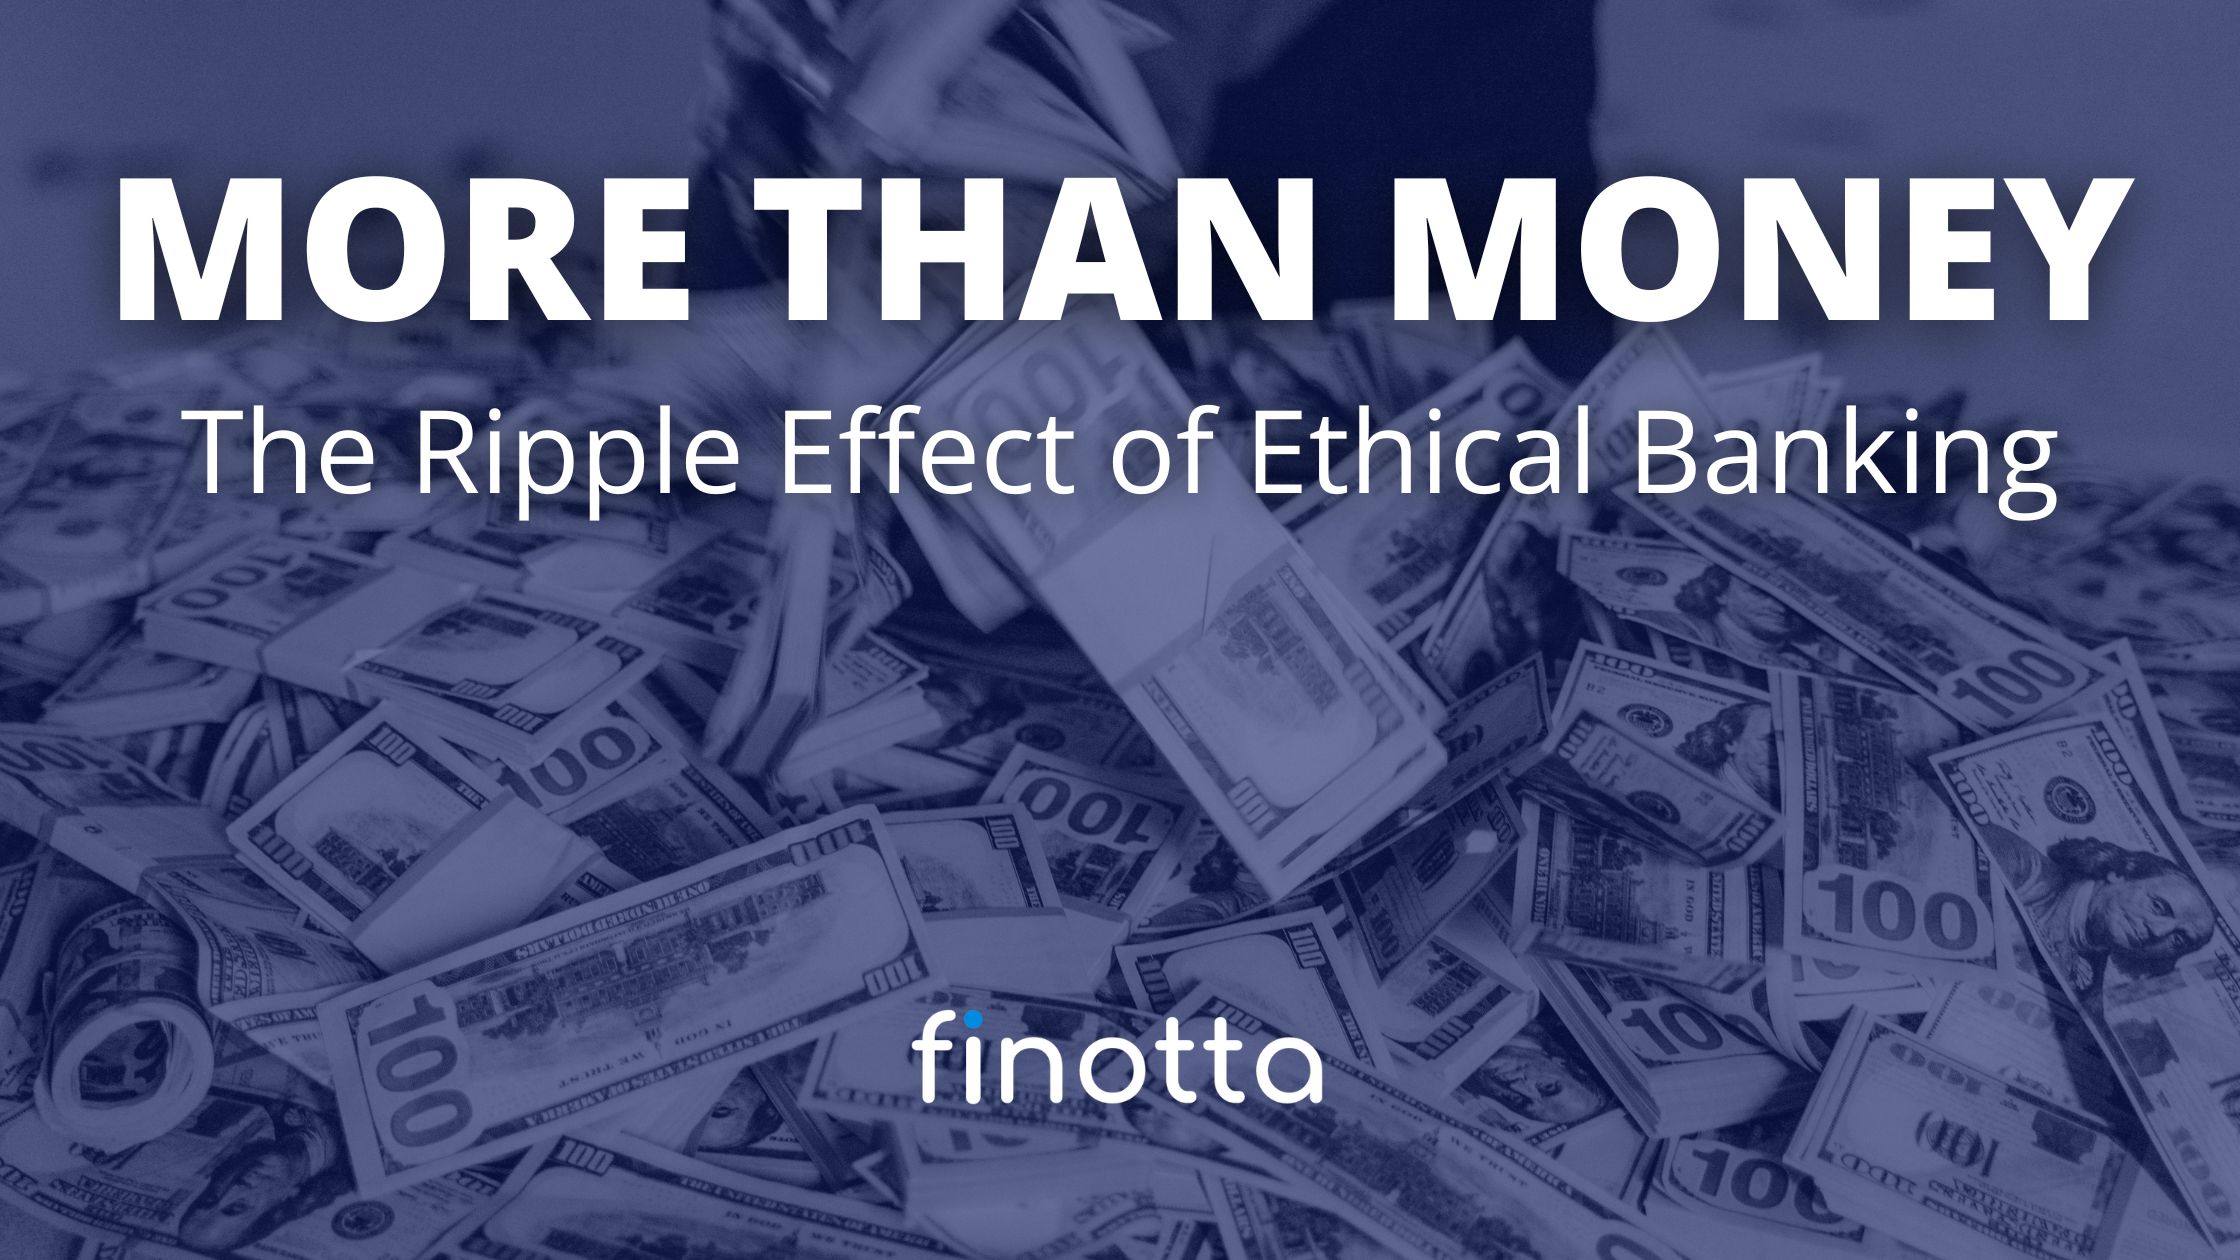 More Than Money: The Ripple Effect of Ethical Banking